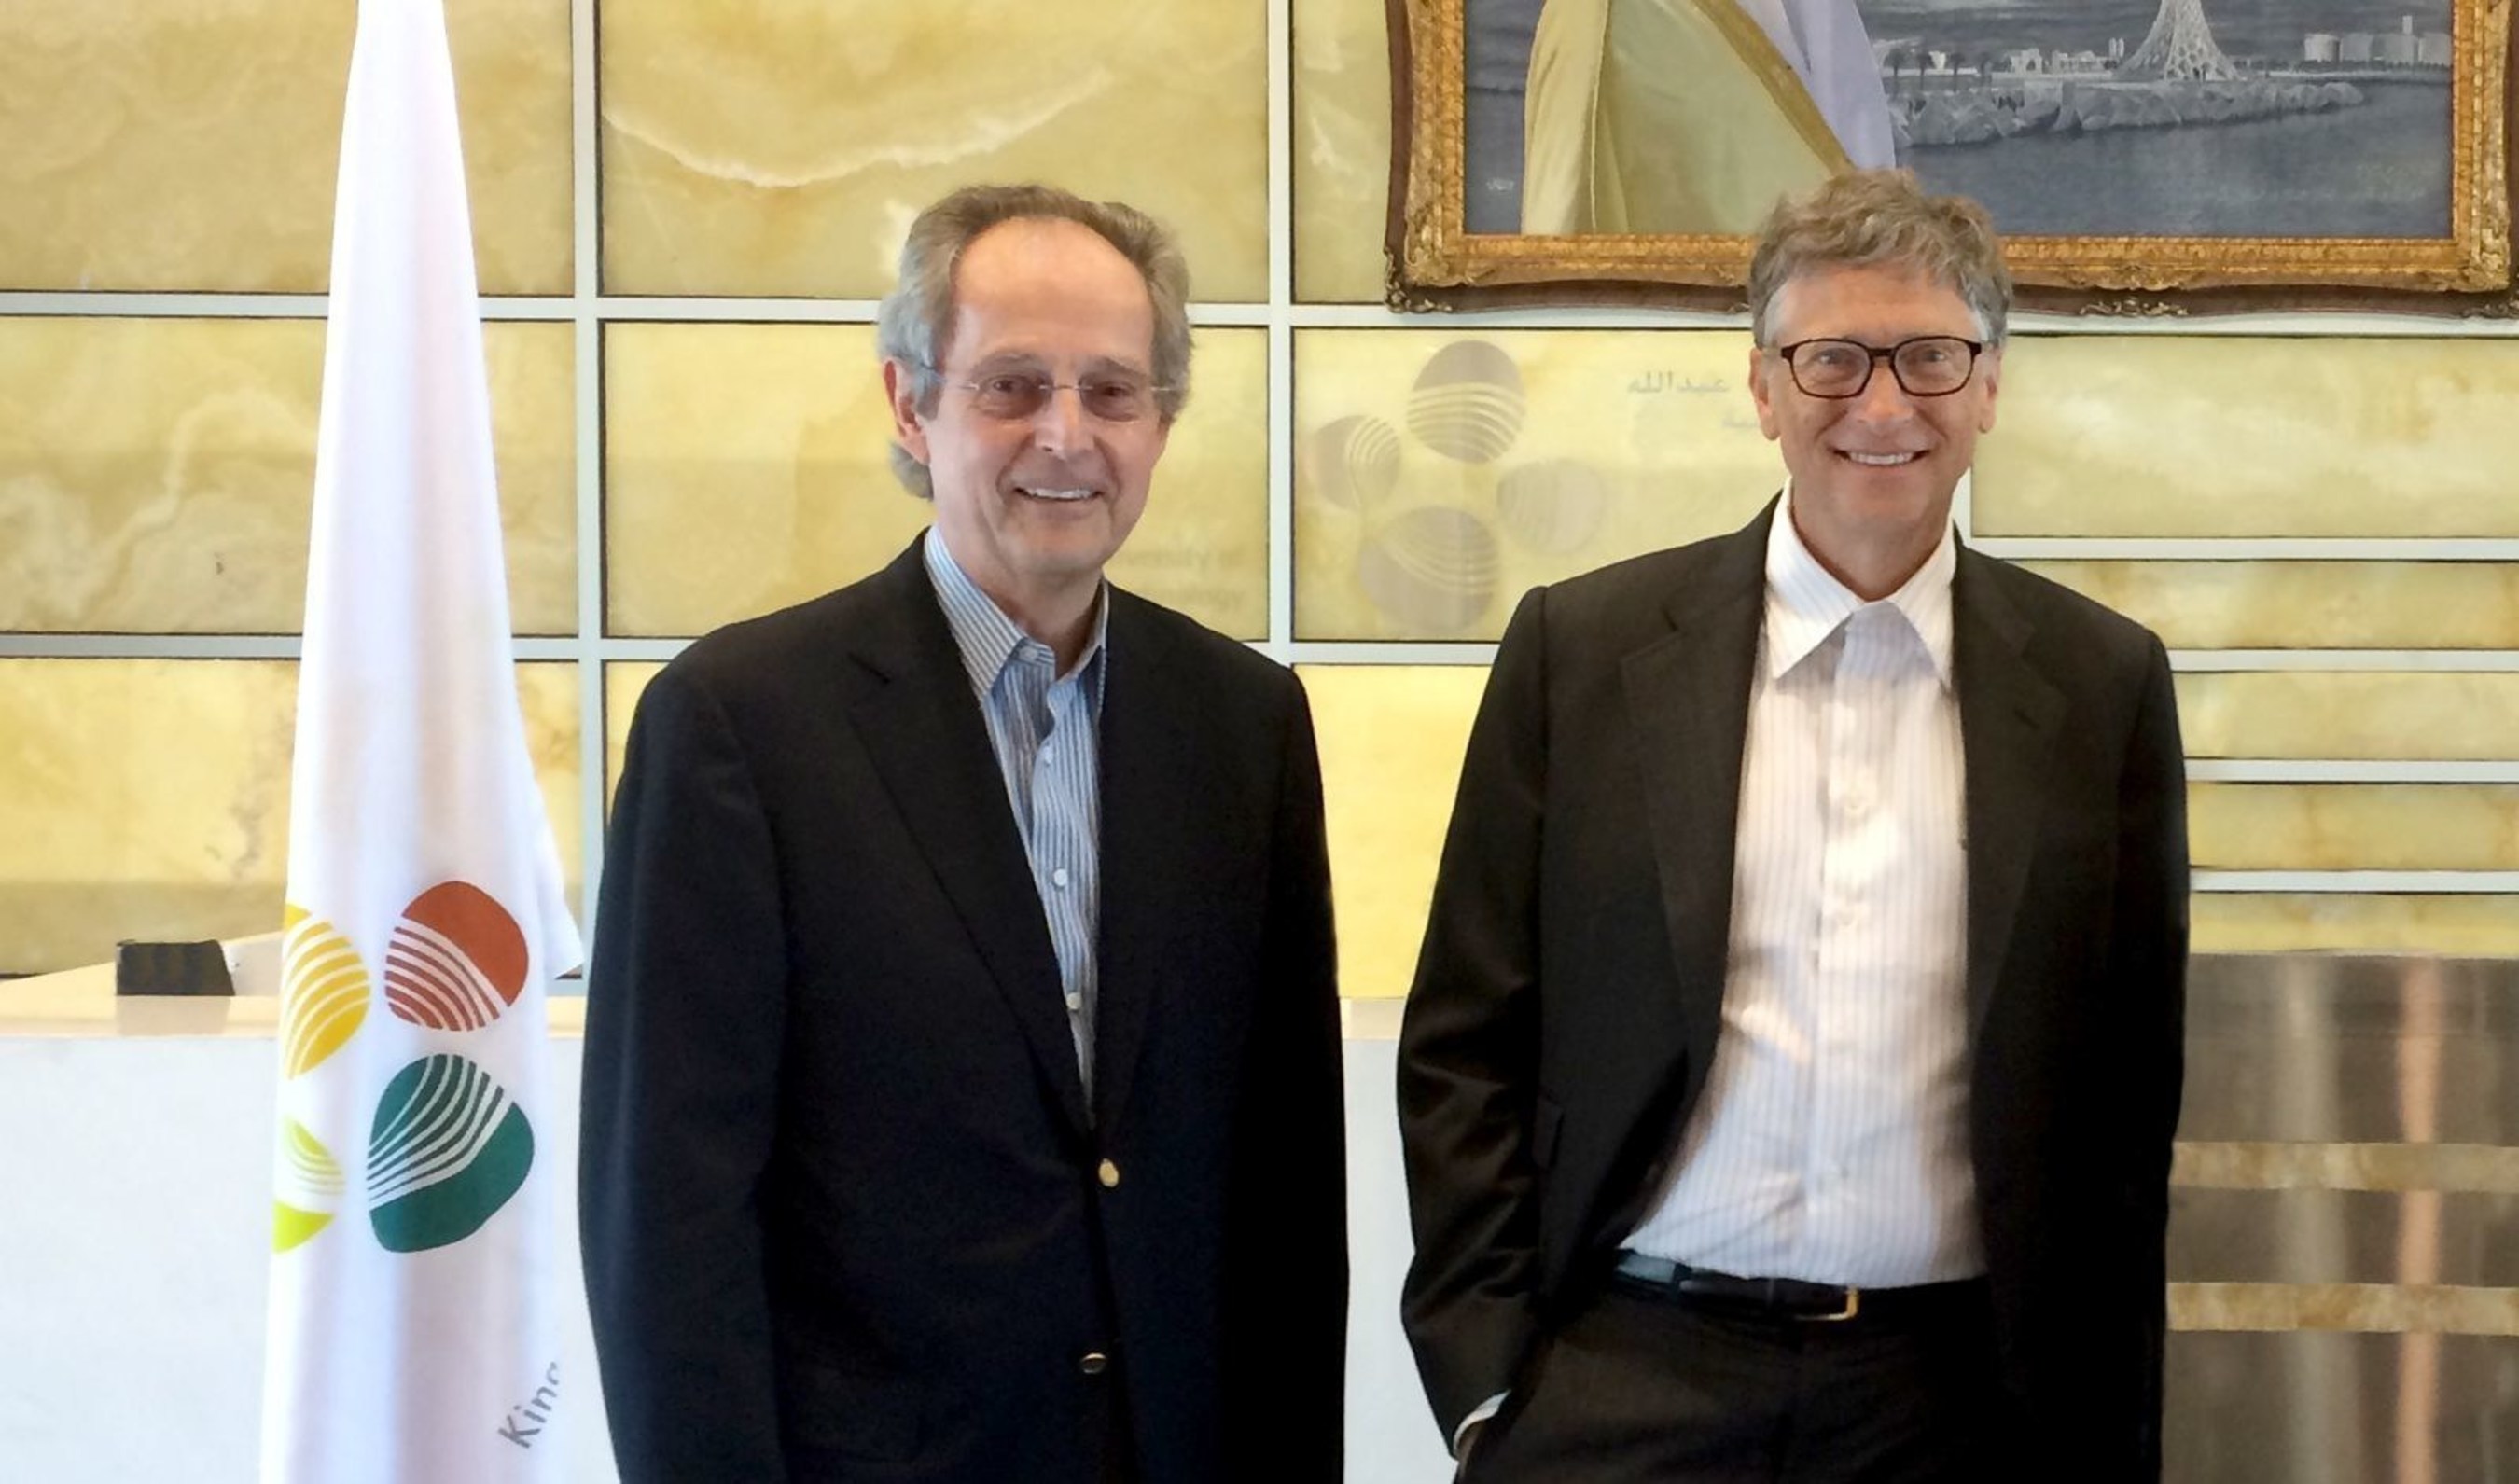 KAUST President Jean-Lou Chameau and Bill Gates during a 2014 tour of KAUST laboratories and research centers (PRNewsFoto/KAUST) (PRNewsFoto/KAUST)